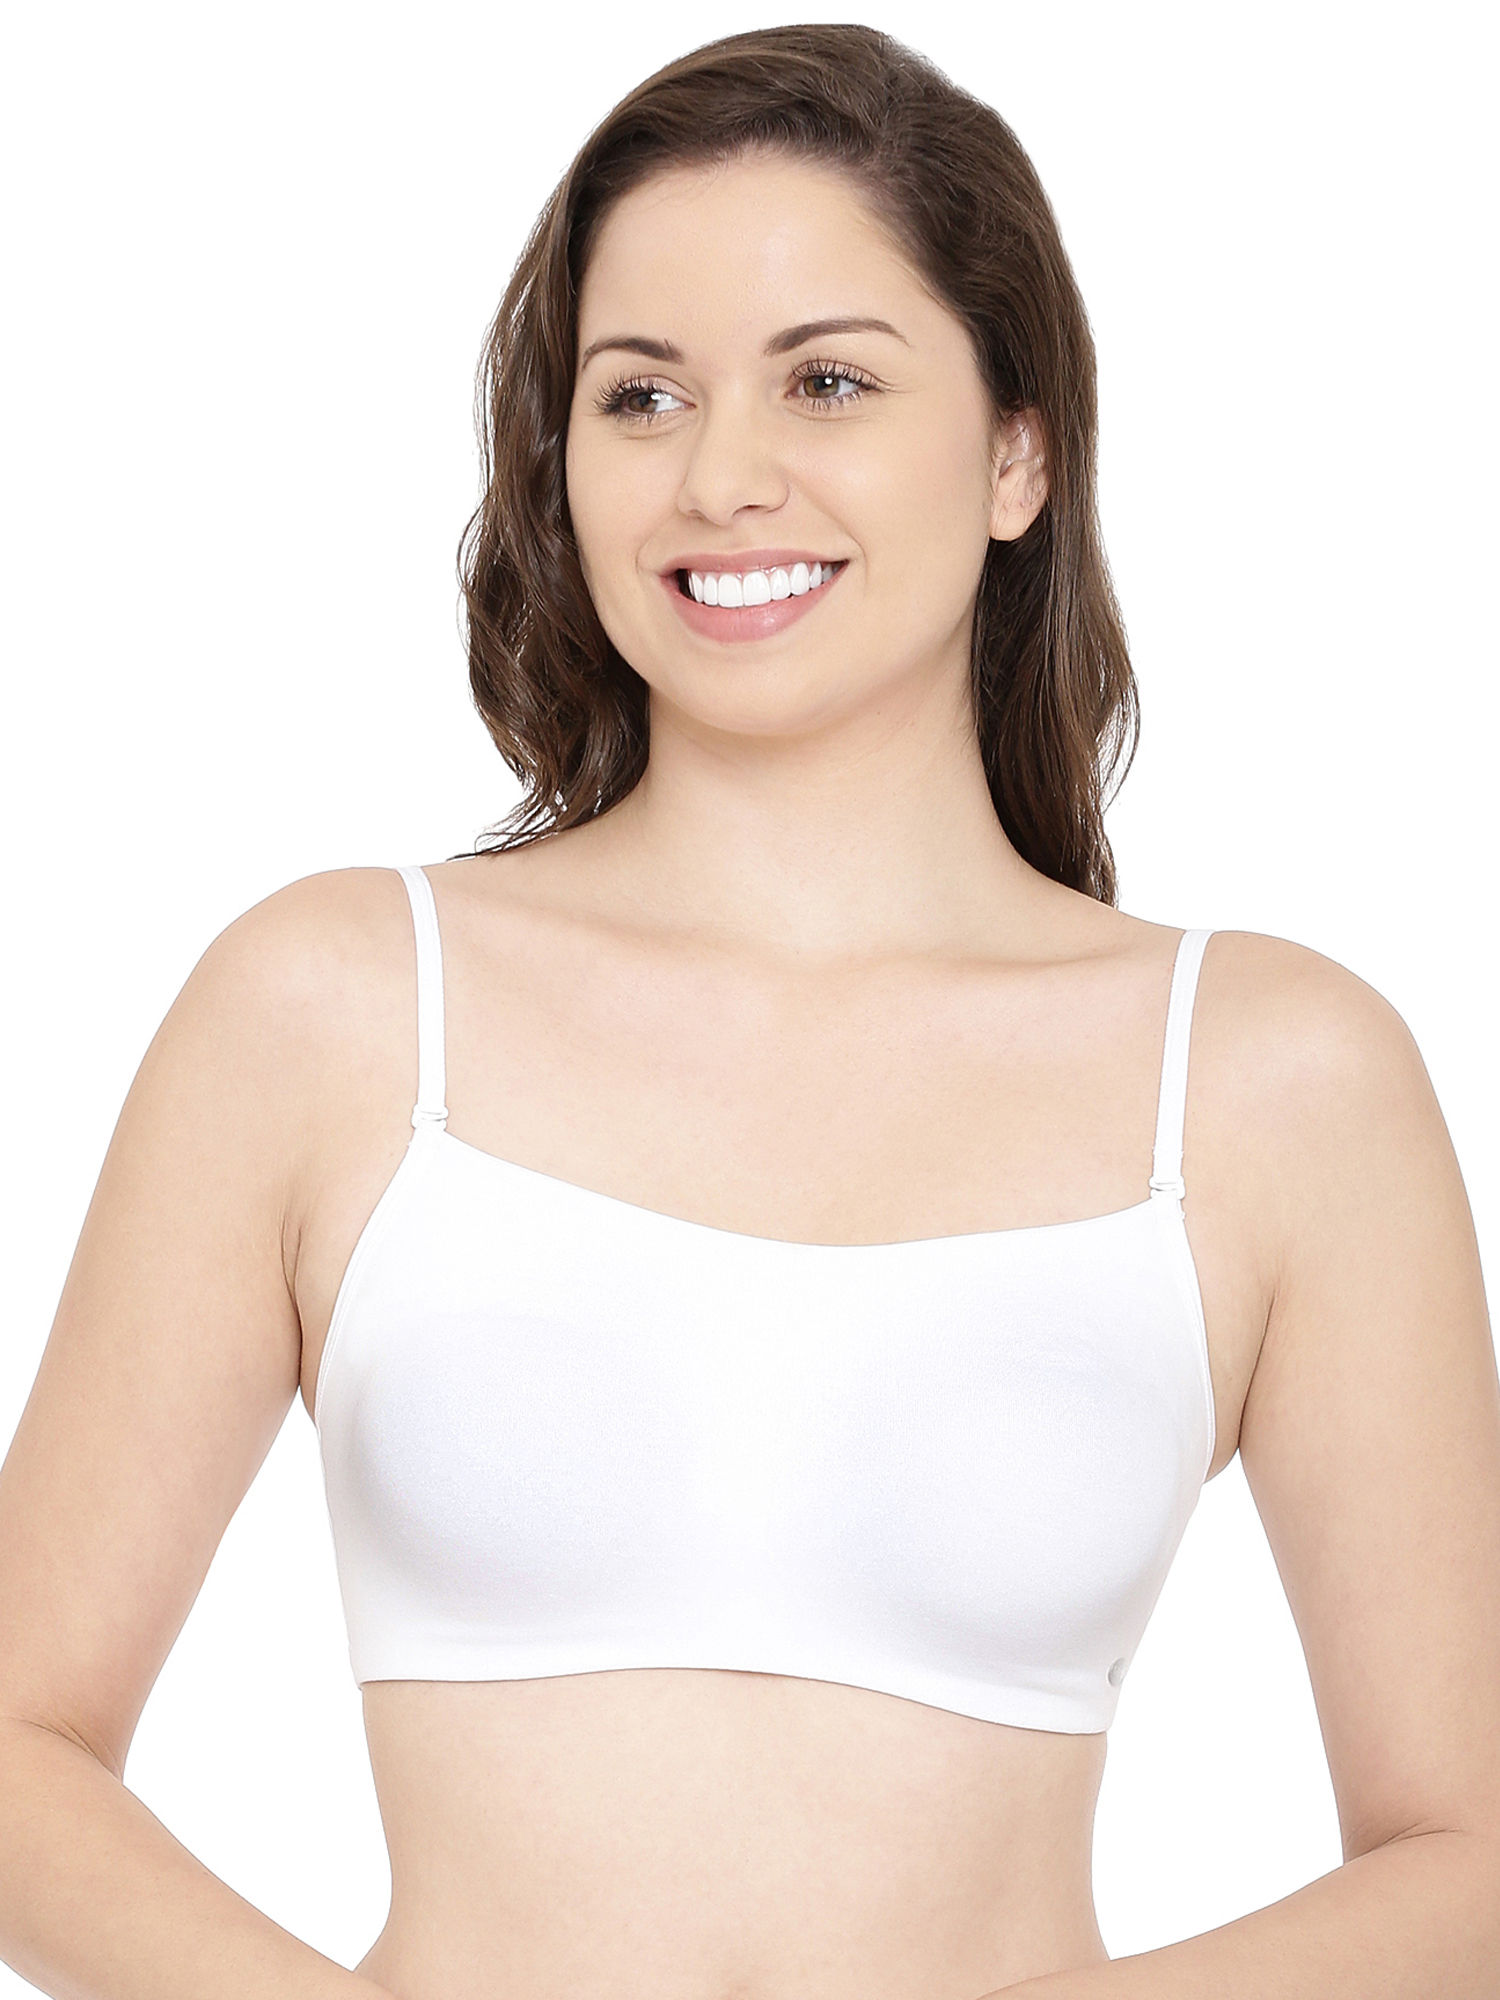 Enamor A022 Basic Cotton Cami With Detachable Straps Bra -Non-Padded  Wirefree High Coverage - White